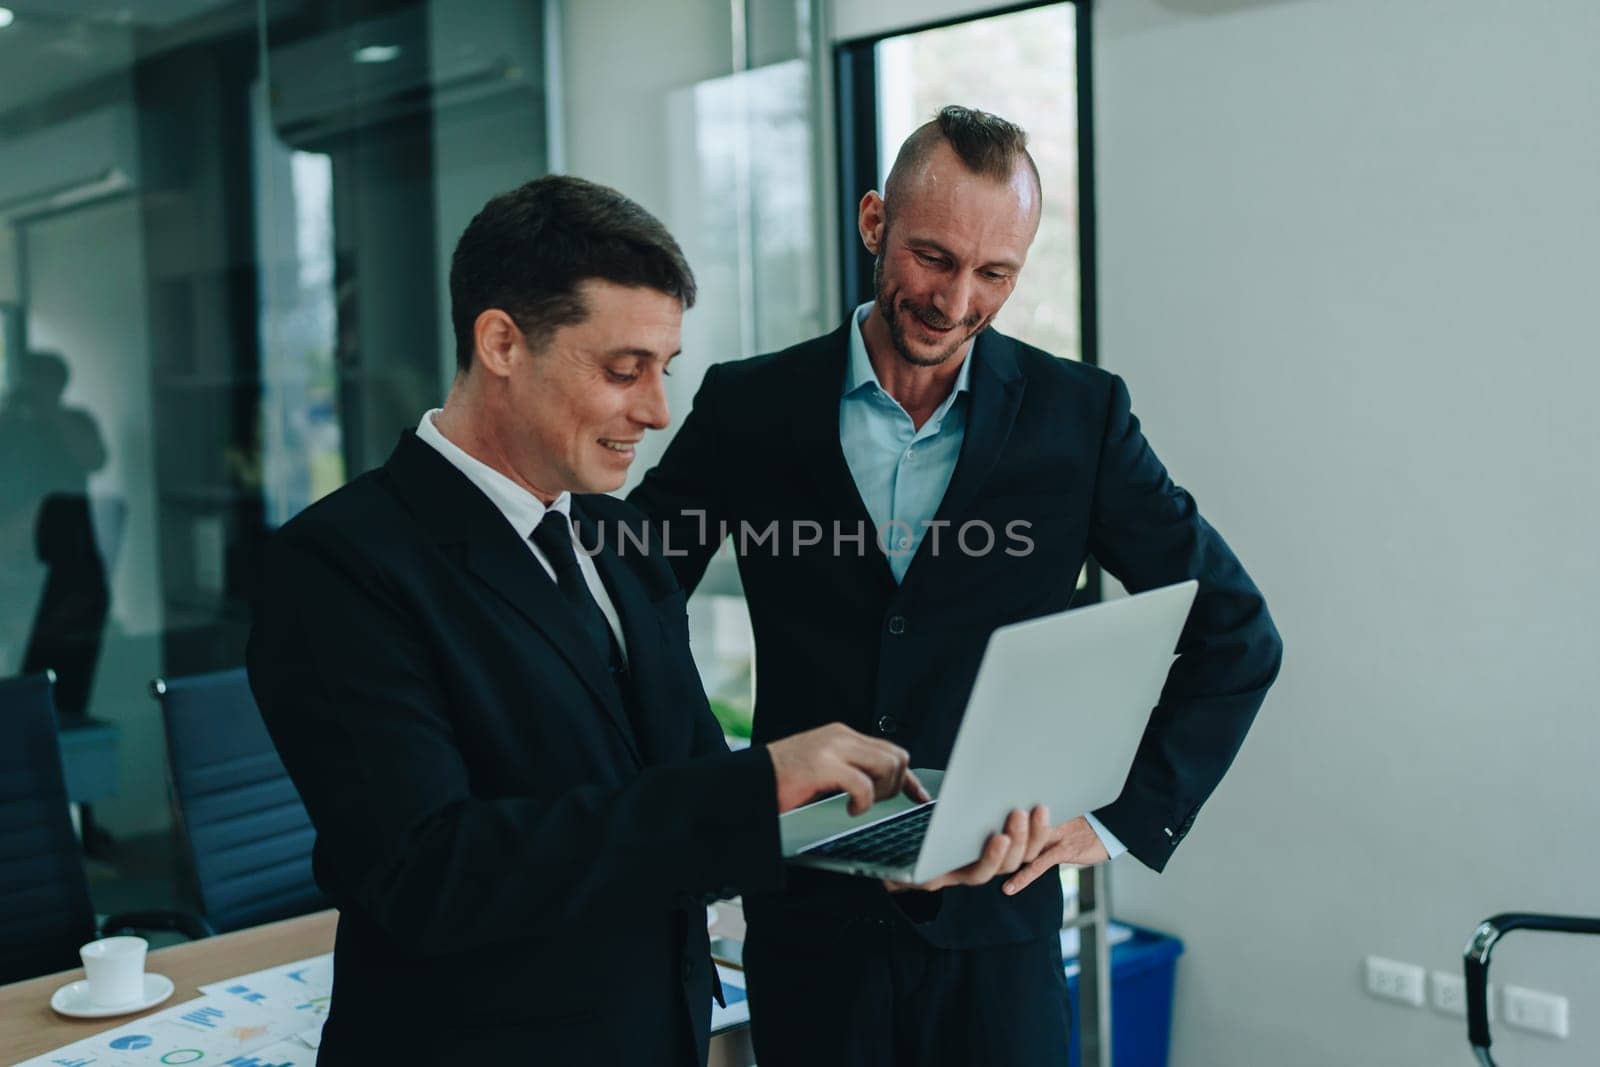 Two business men meeting to talking or discuss marketing work in workplace using paperwork, calculator, computer to work. by Manastrong